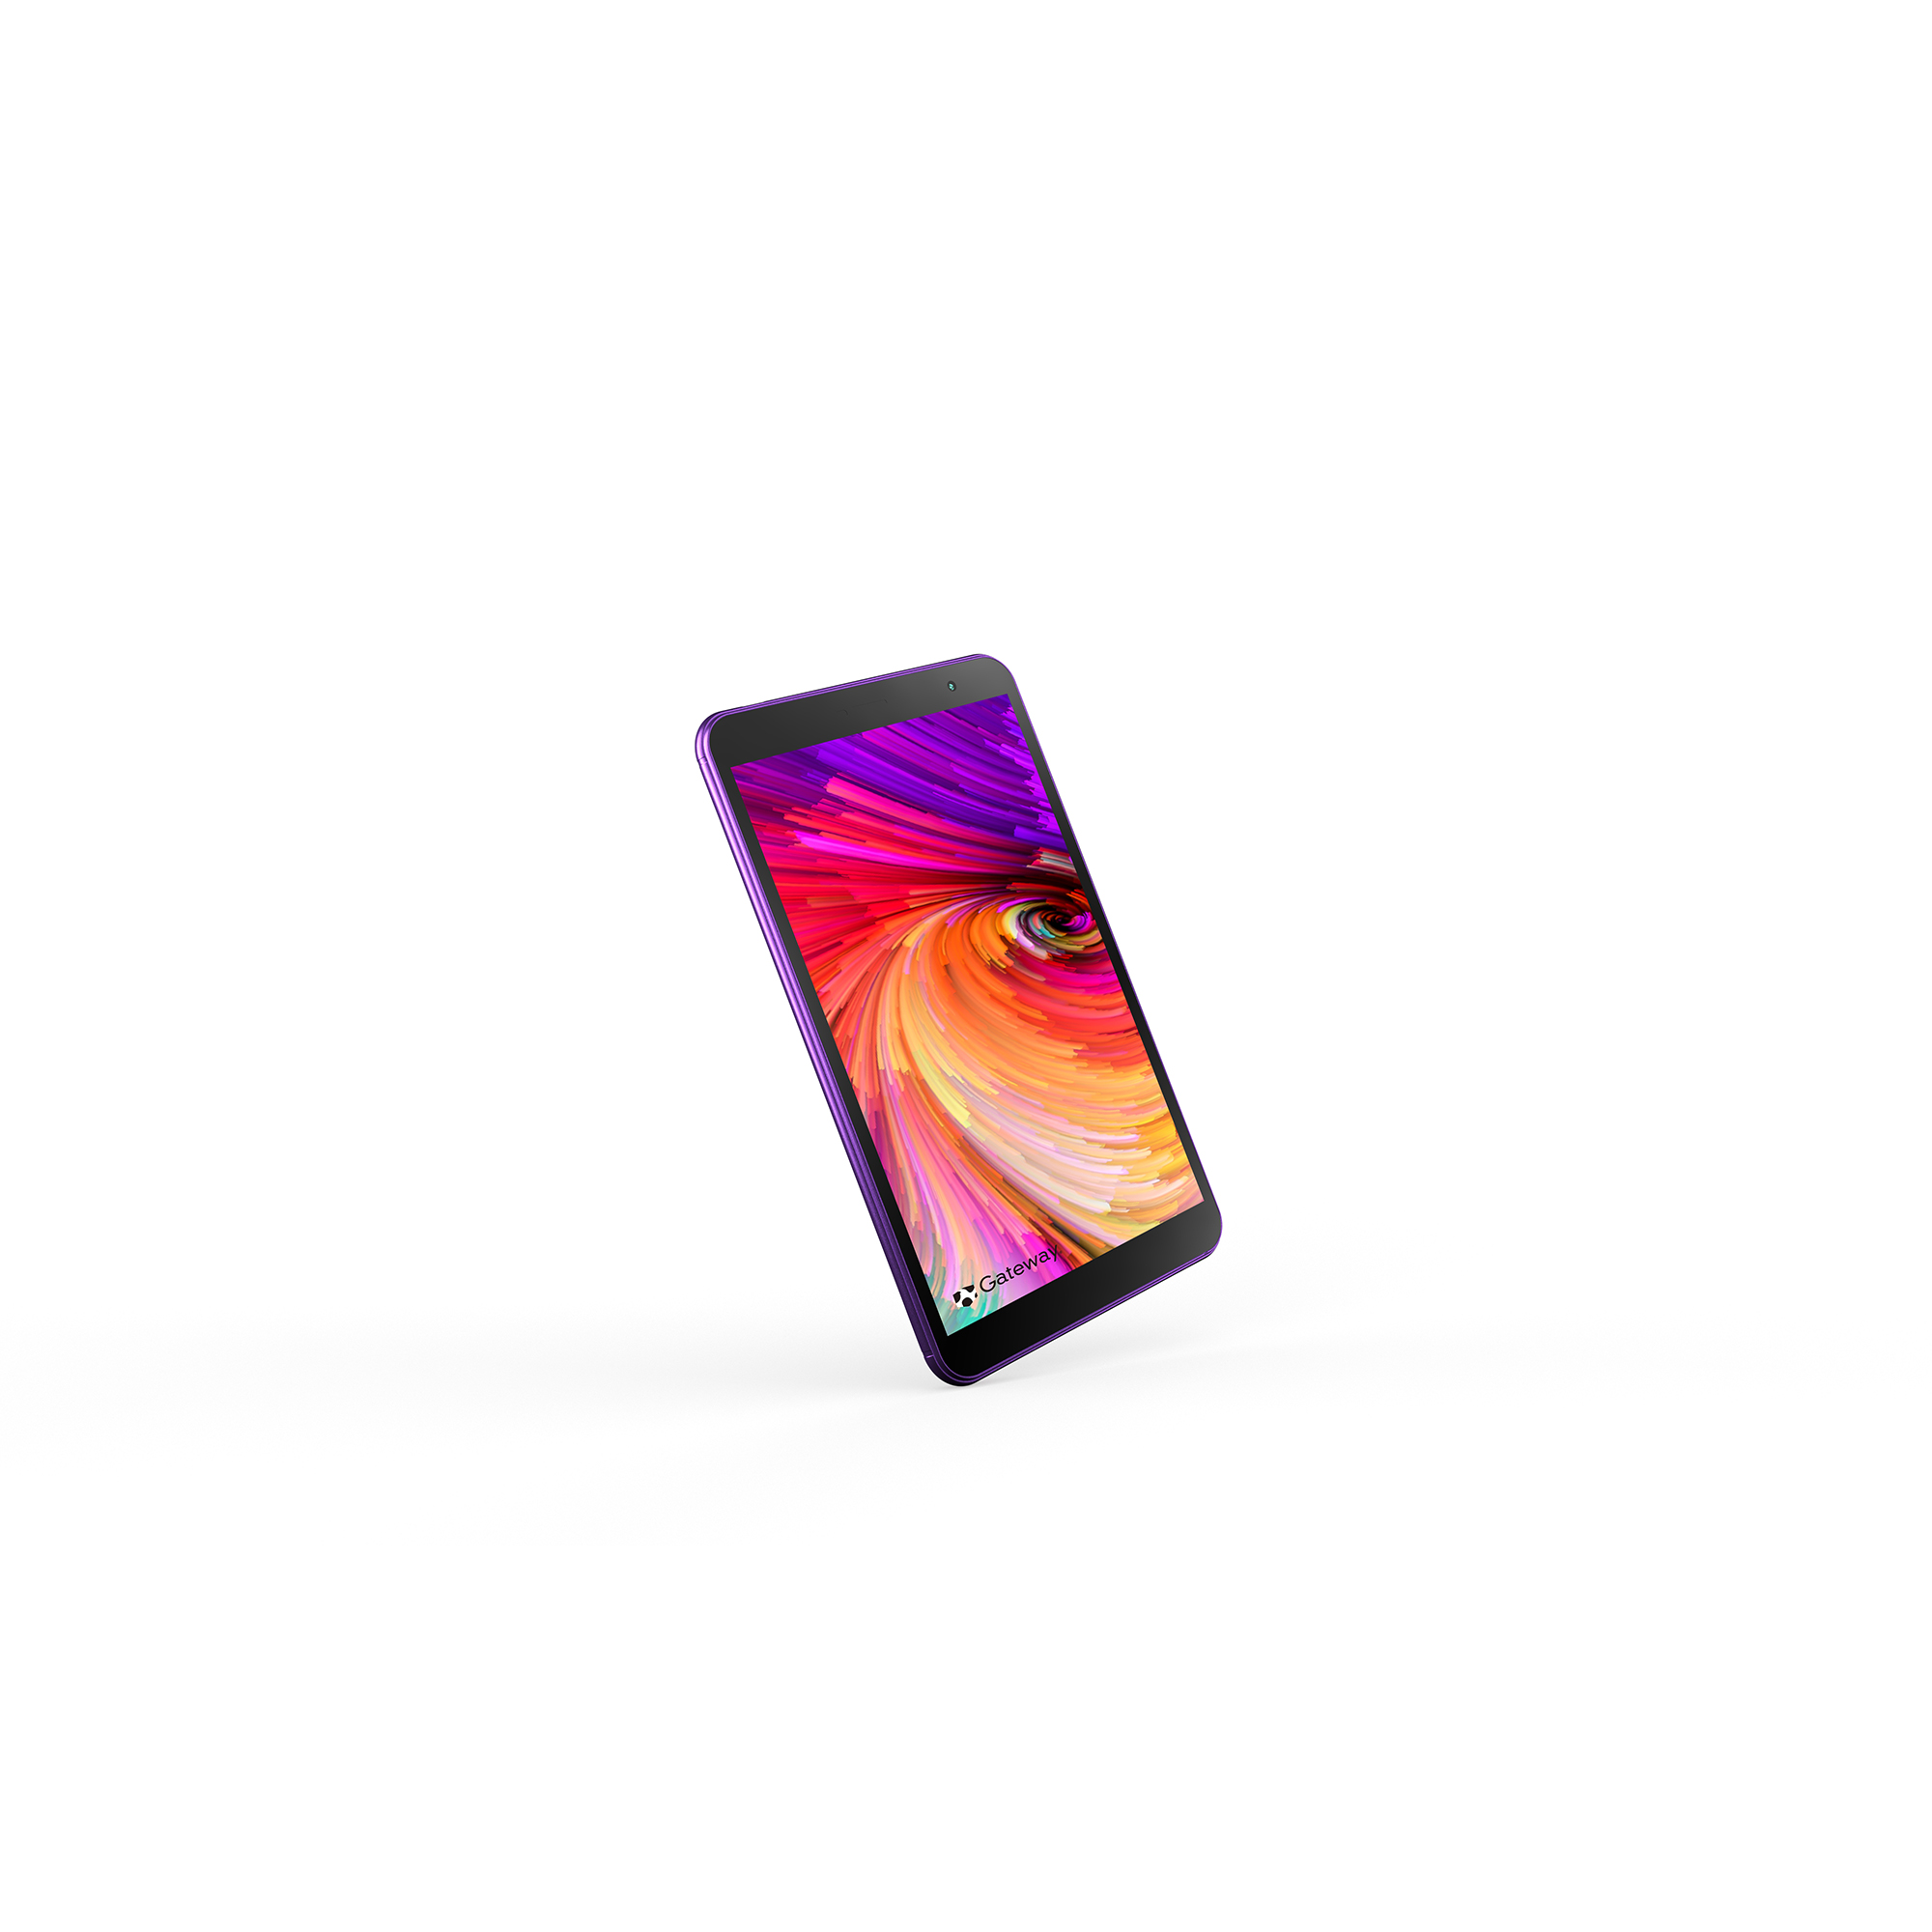 Gateway 8” Tablet, Quad Core, 32GB Storage, 2GB Memory, 0.3MP Front Camera, 2MP Rear Camera, USB-C, Sound ID, Android 10 Go Edition, Purple - image 2 of 5